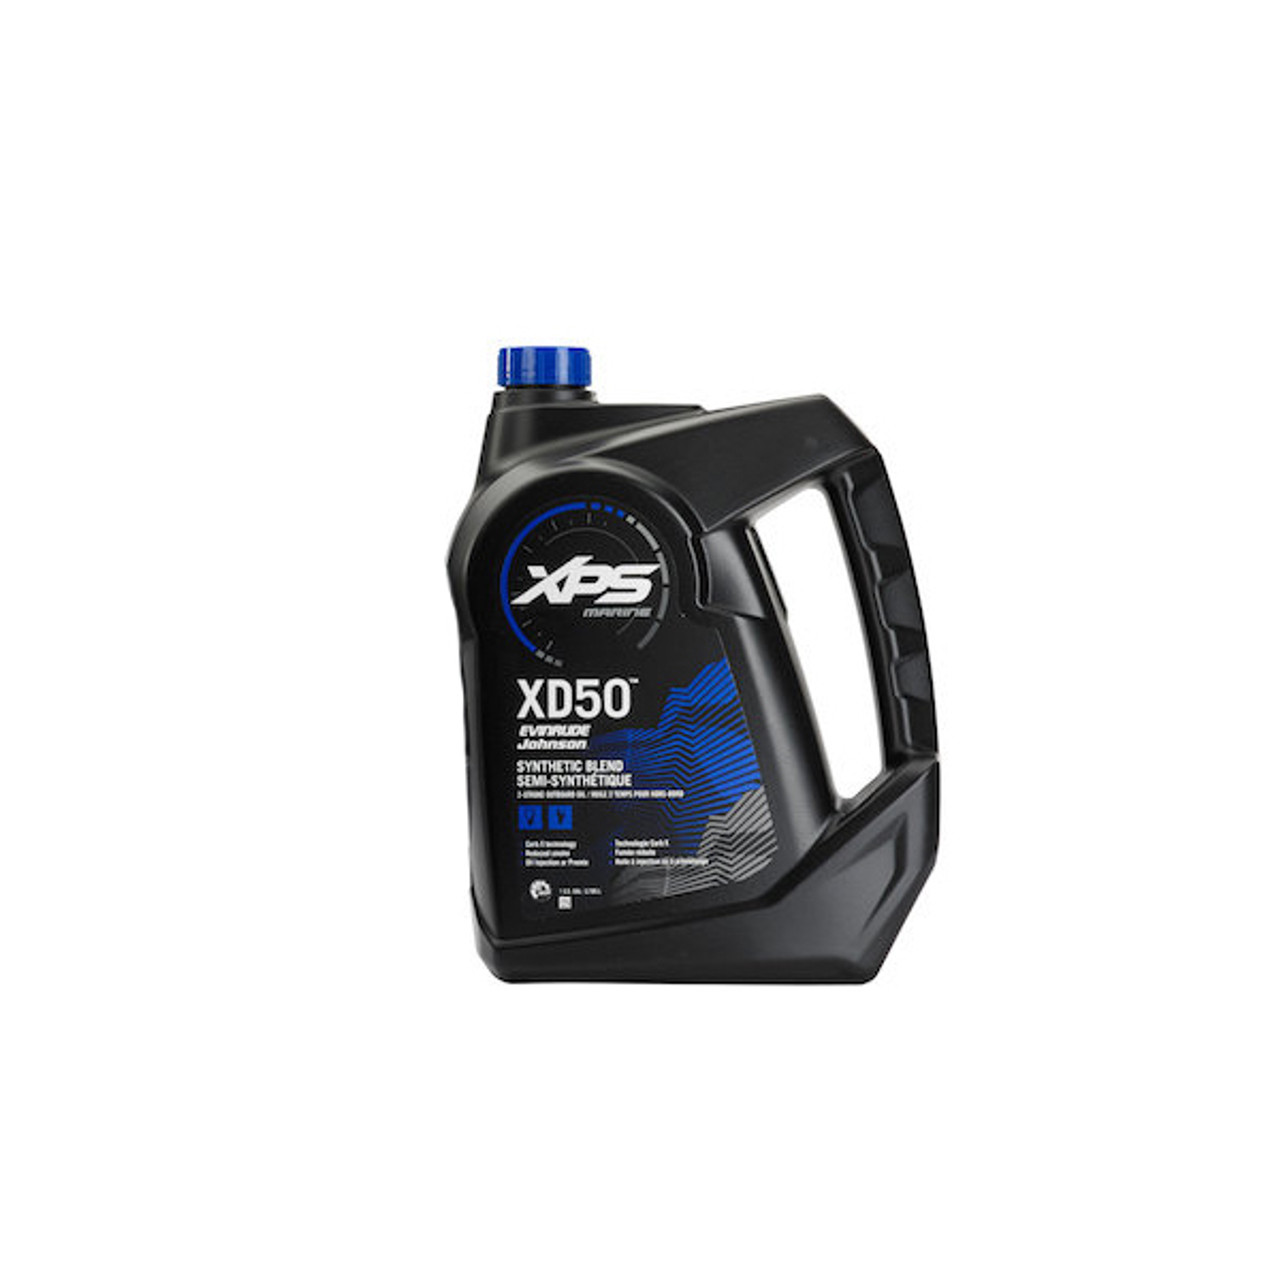 Johnson XD50 2-Cycle Outboard Motor Oil